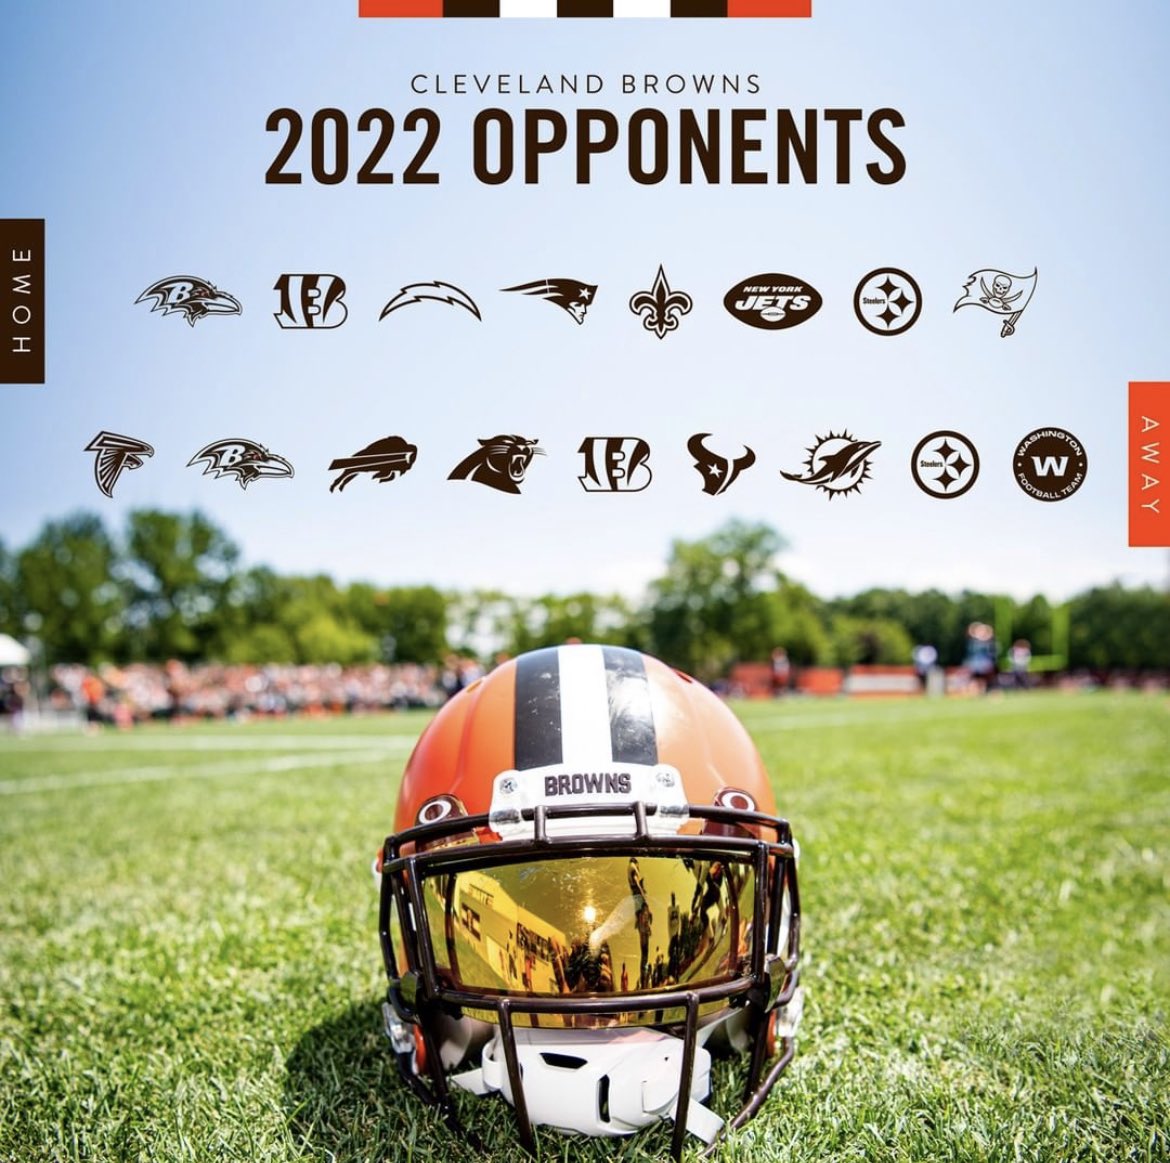 cleveland browns 2022 opponents